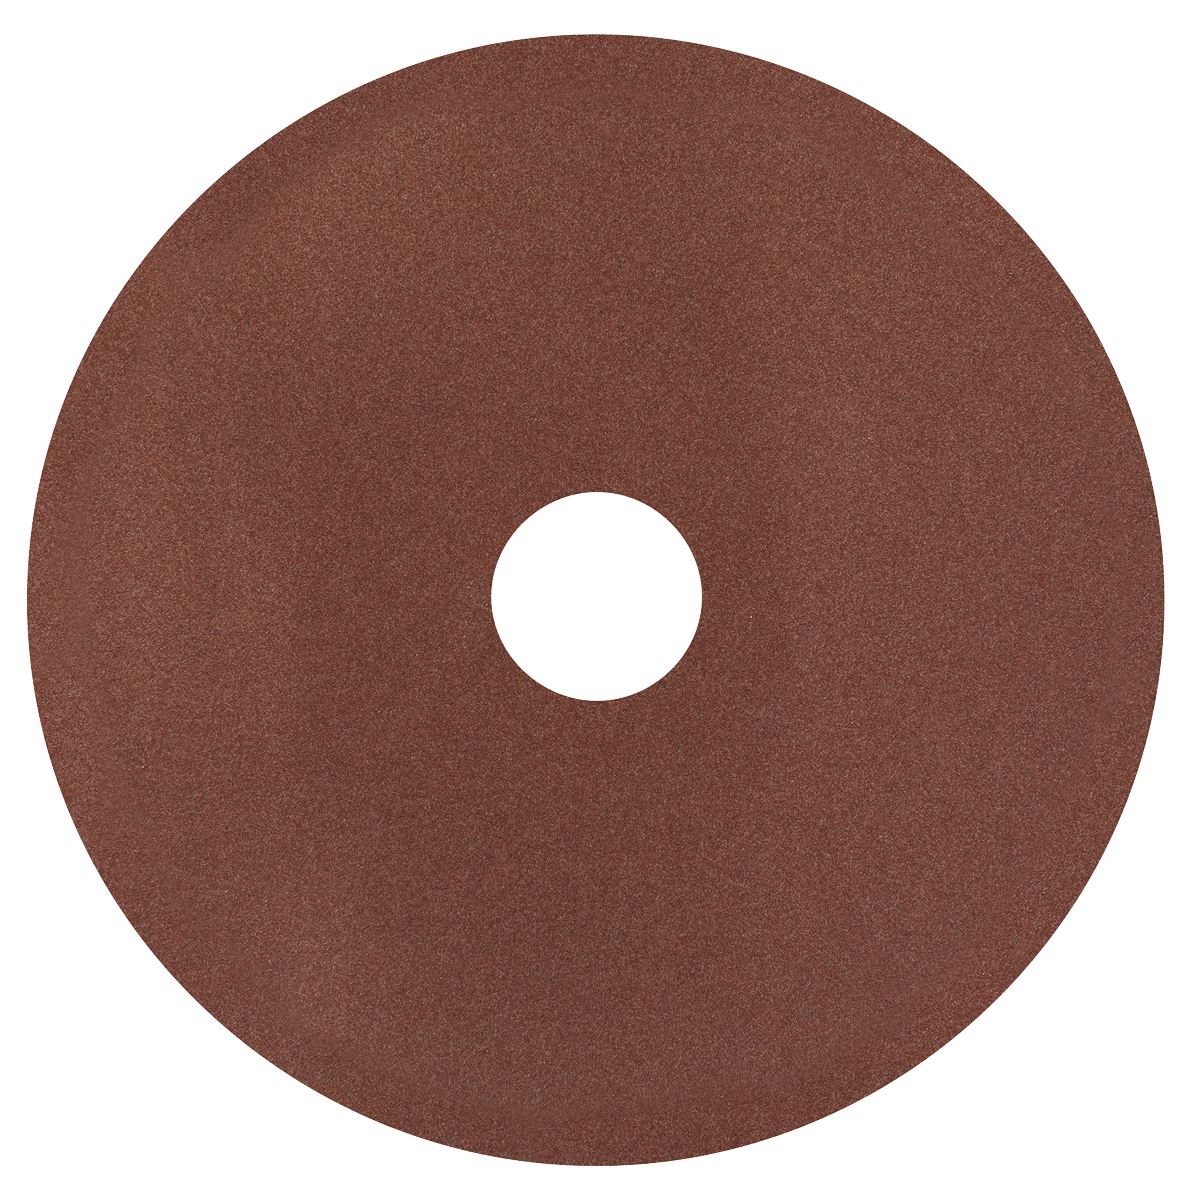 Worksafe by Sealey Fibre Backed Disc Ø125mm - 120Grit Pack of 25